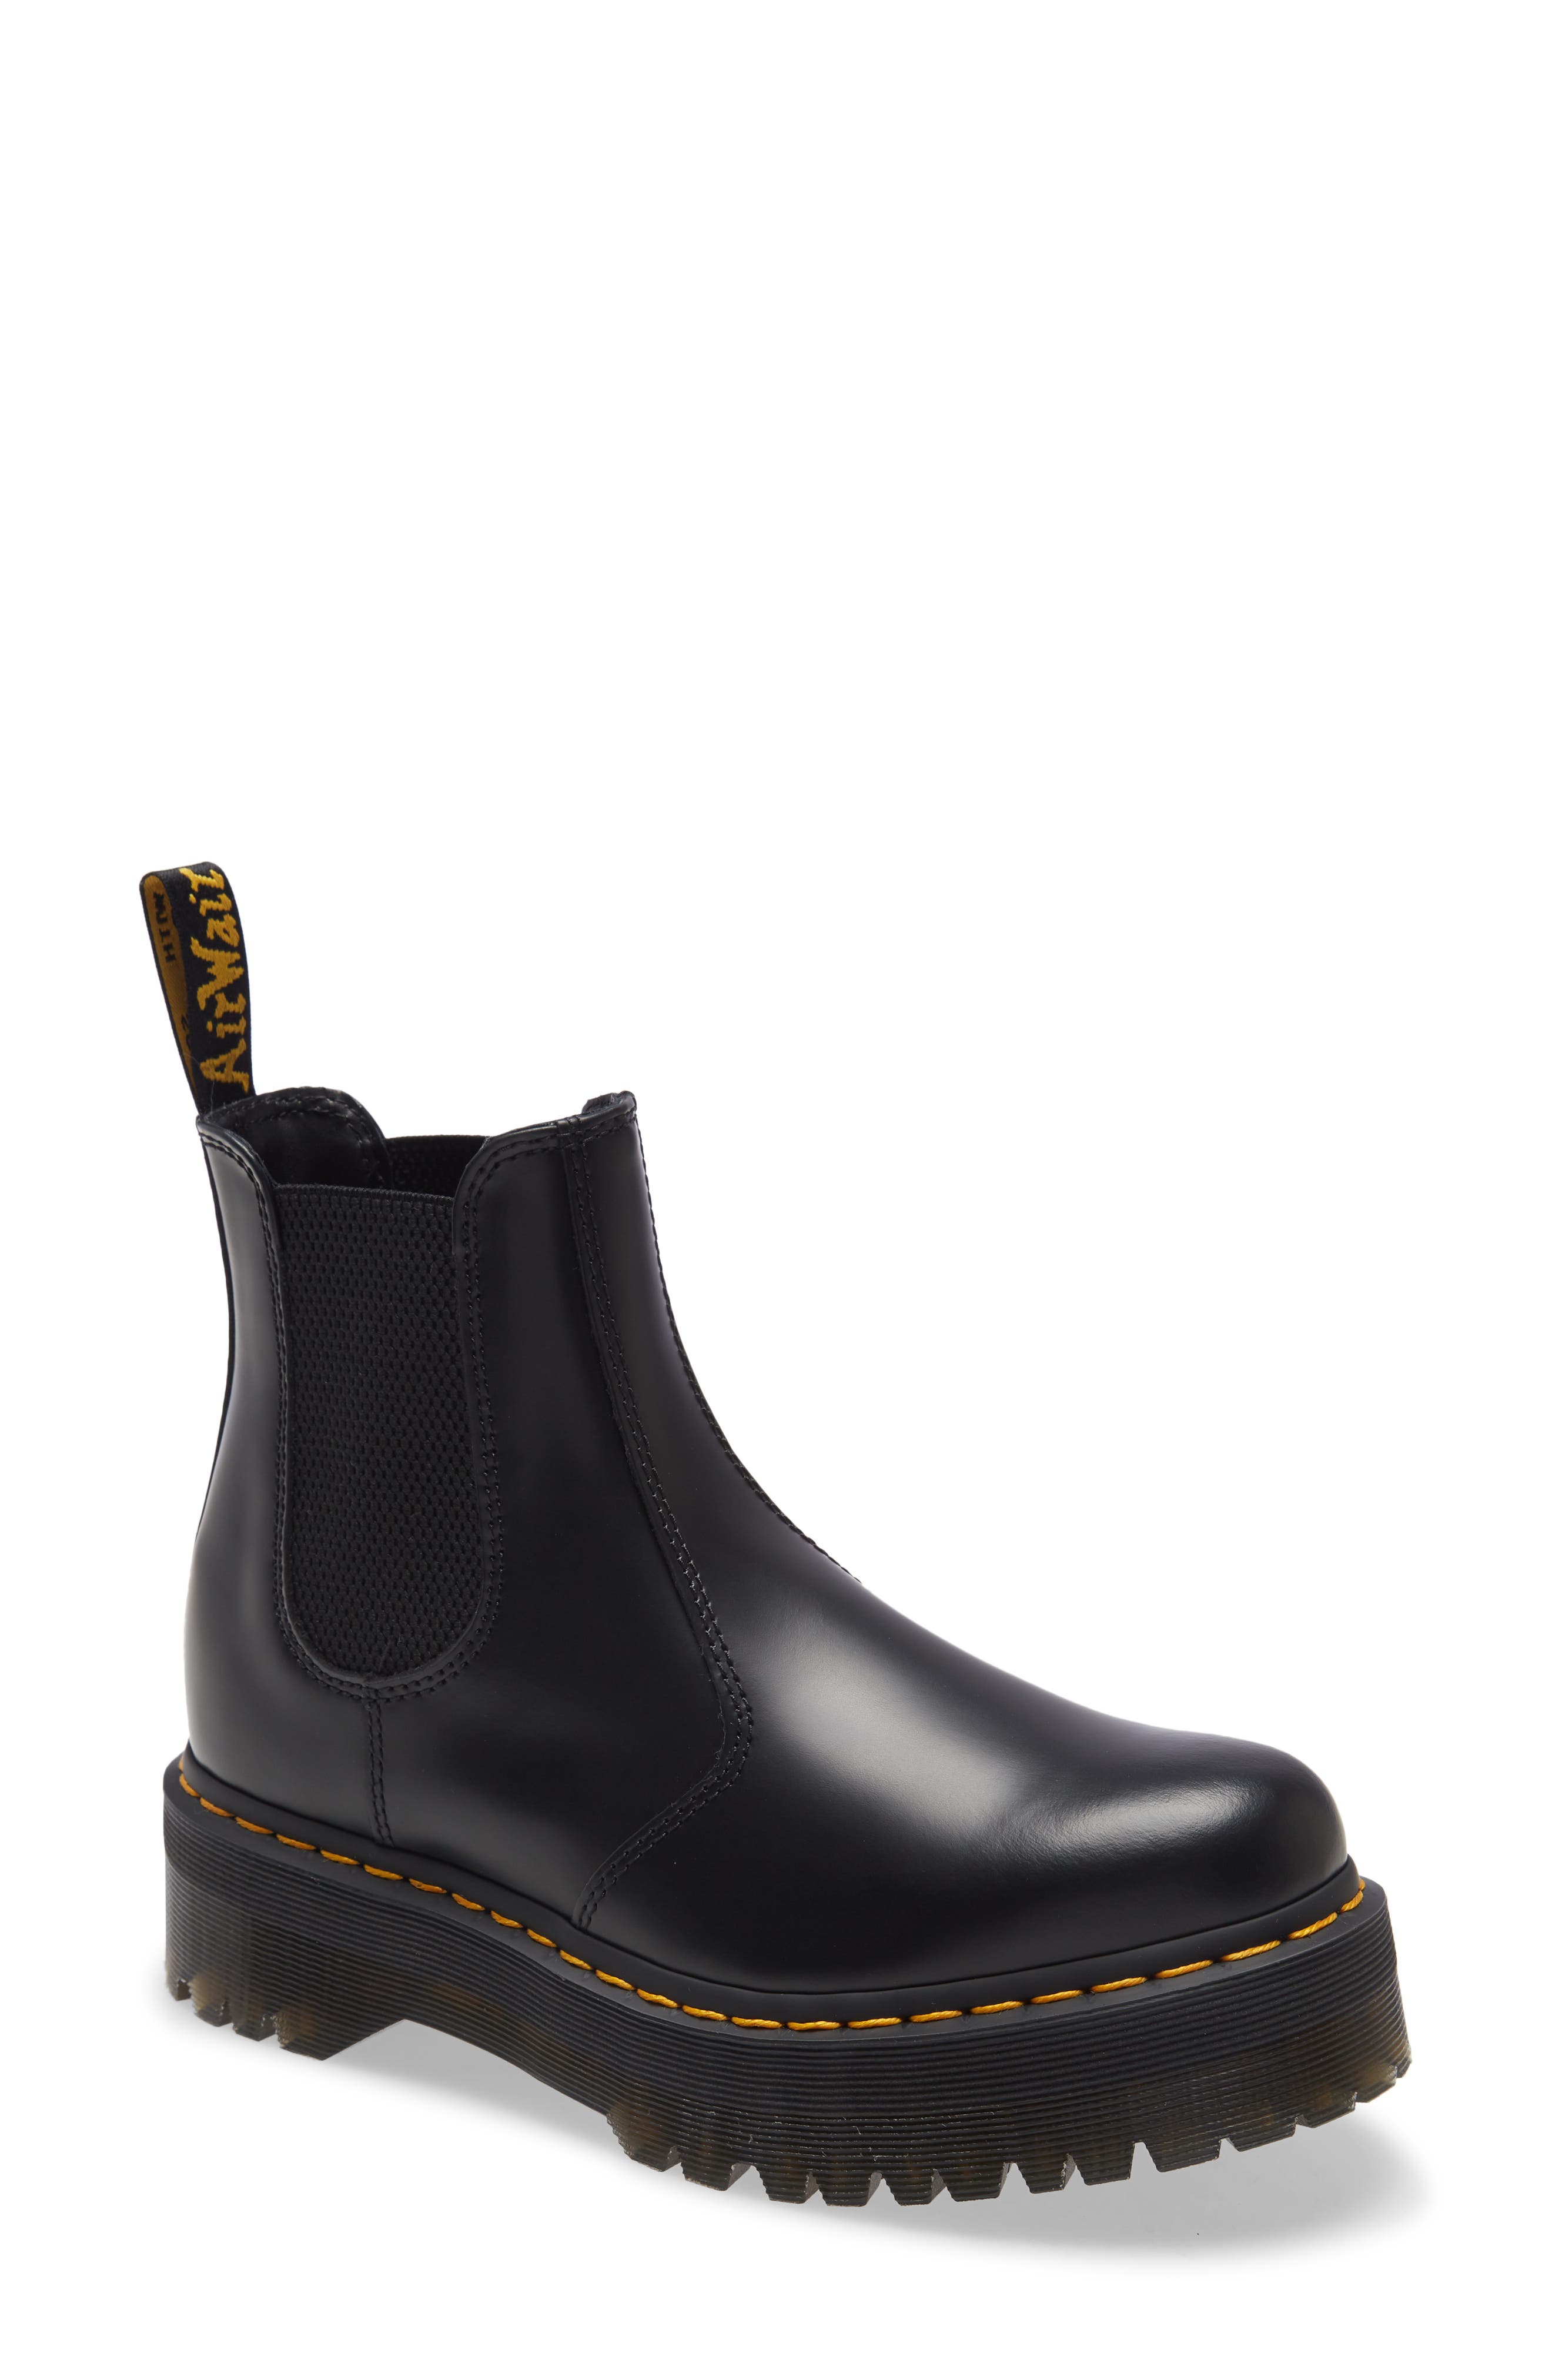 Dr. Martens 2976 Quad Platform Chelsea Boot in White Smooth Leather at Nordstrom